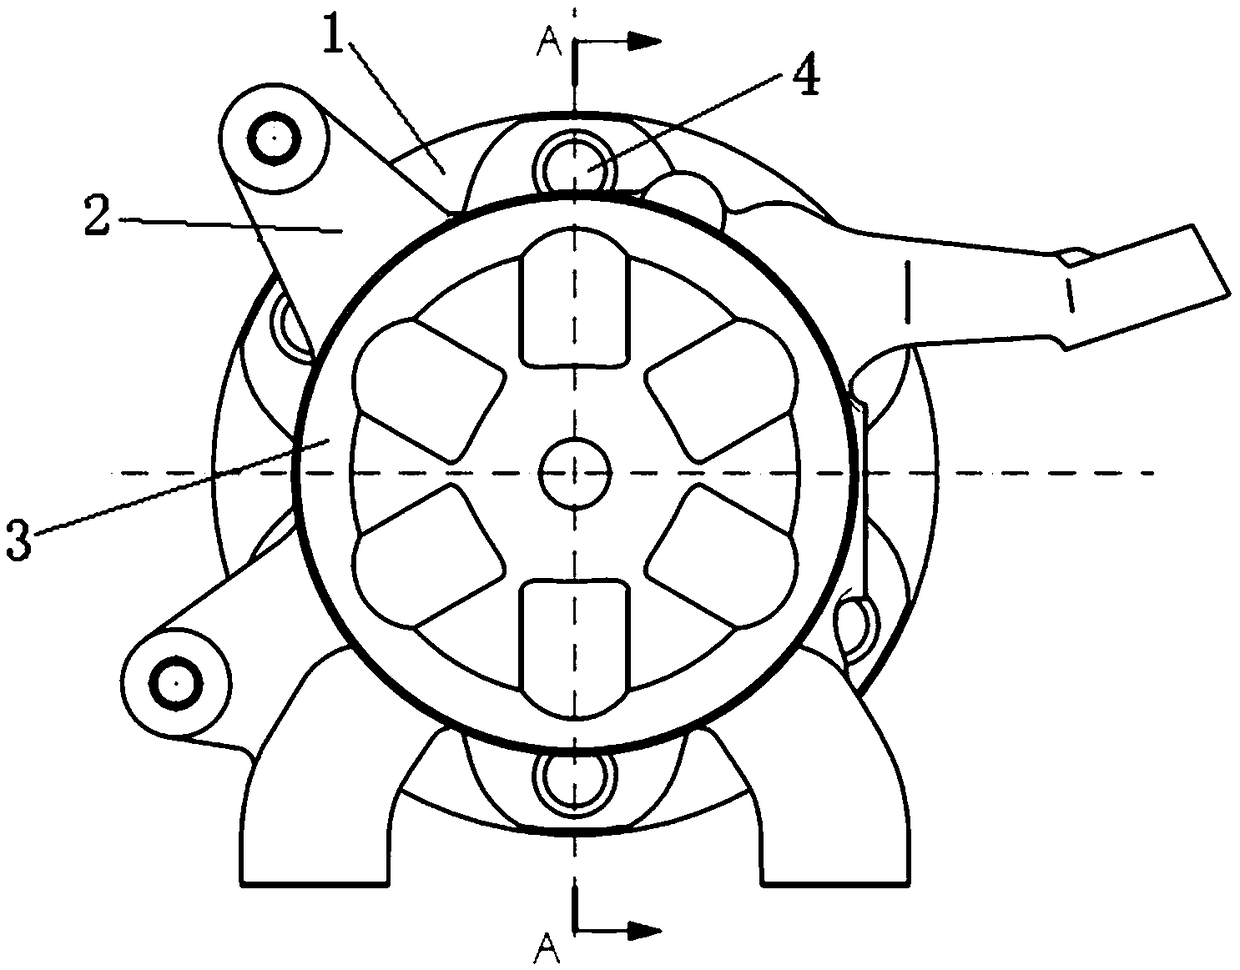 A connection structure between constant velocity universal joint and wheel hub and automobile